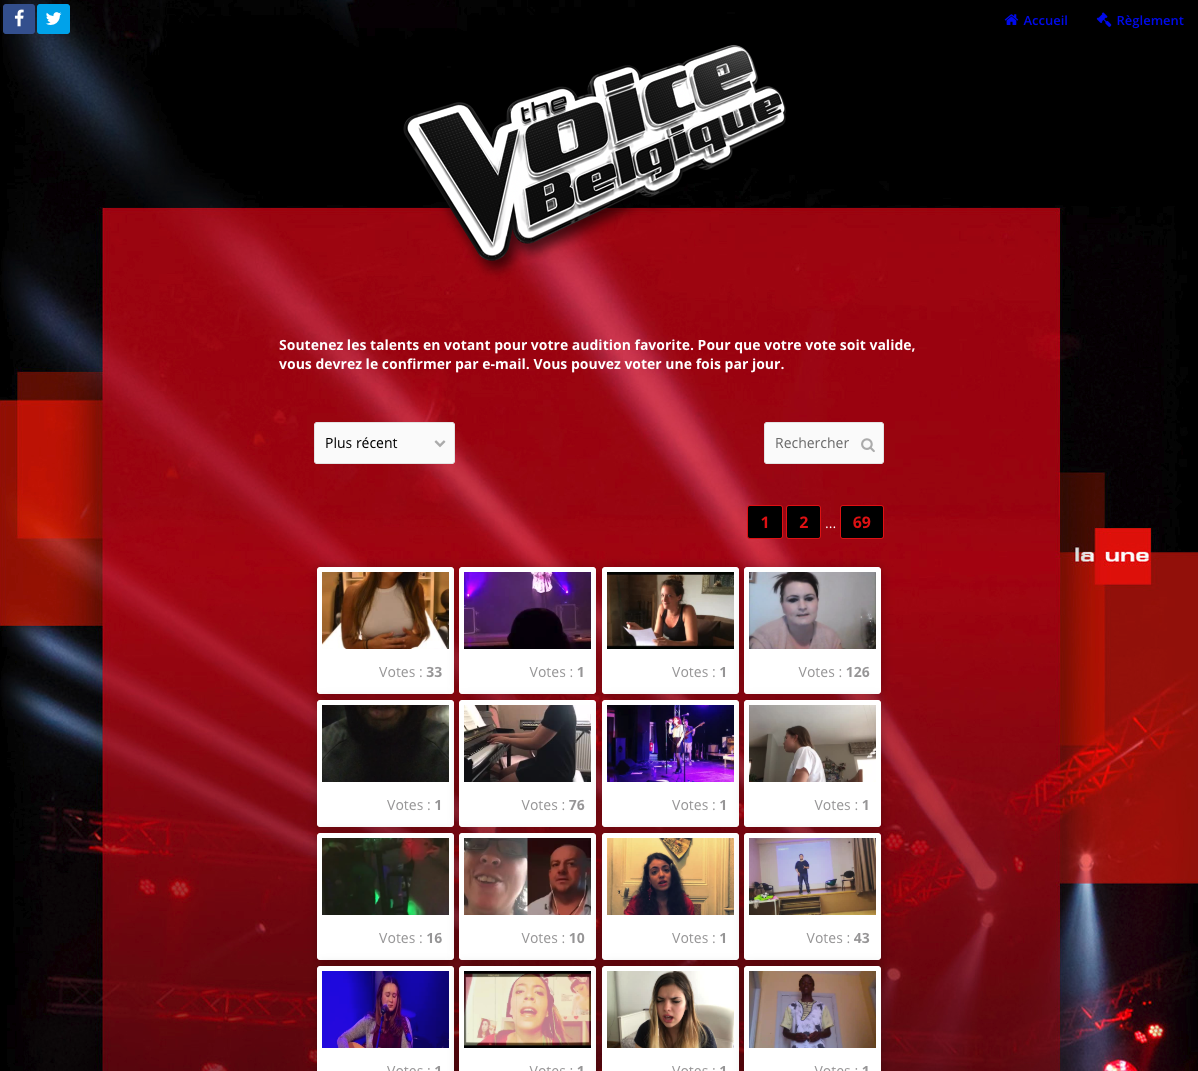 The Voice's online auditions are a good example of UGC